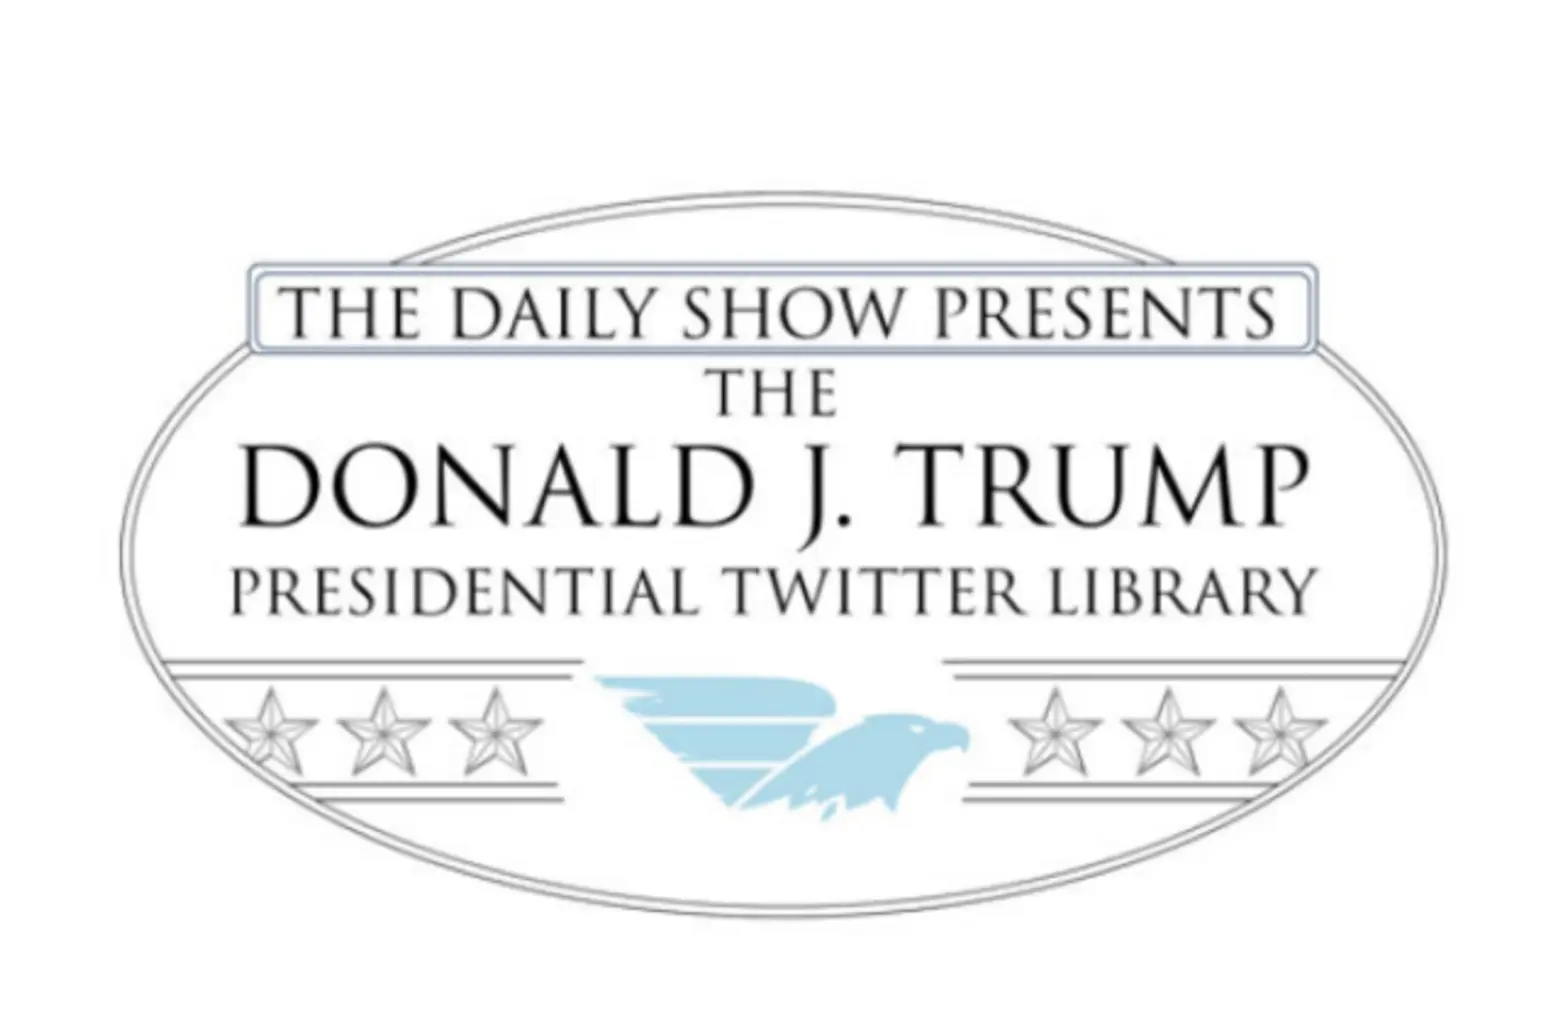 Trump Twitter museum coming to NYC; Uber’s strange lost-and-found list